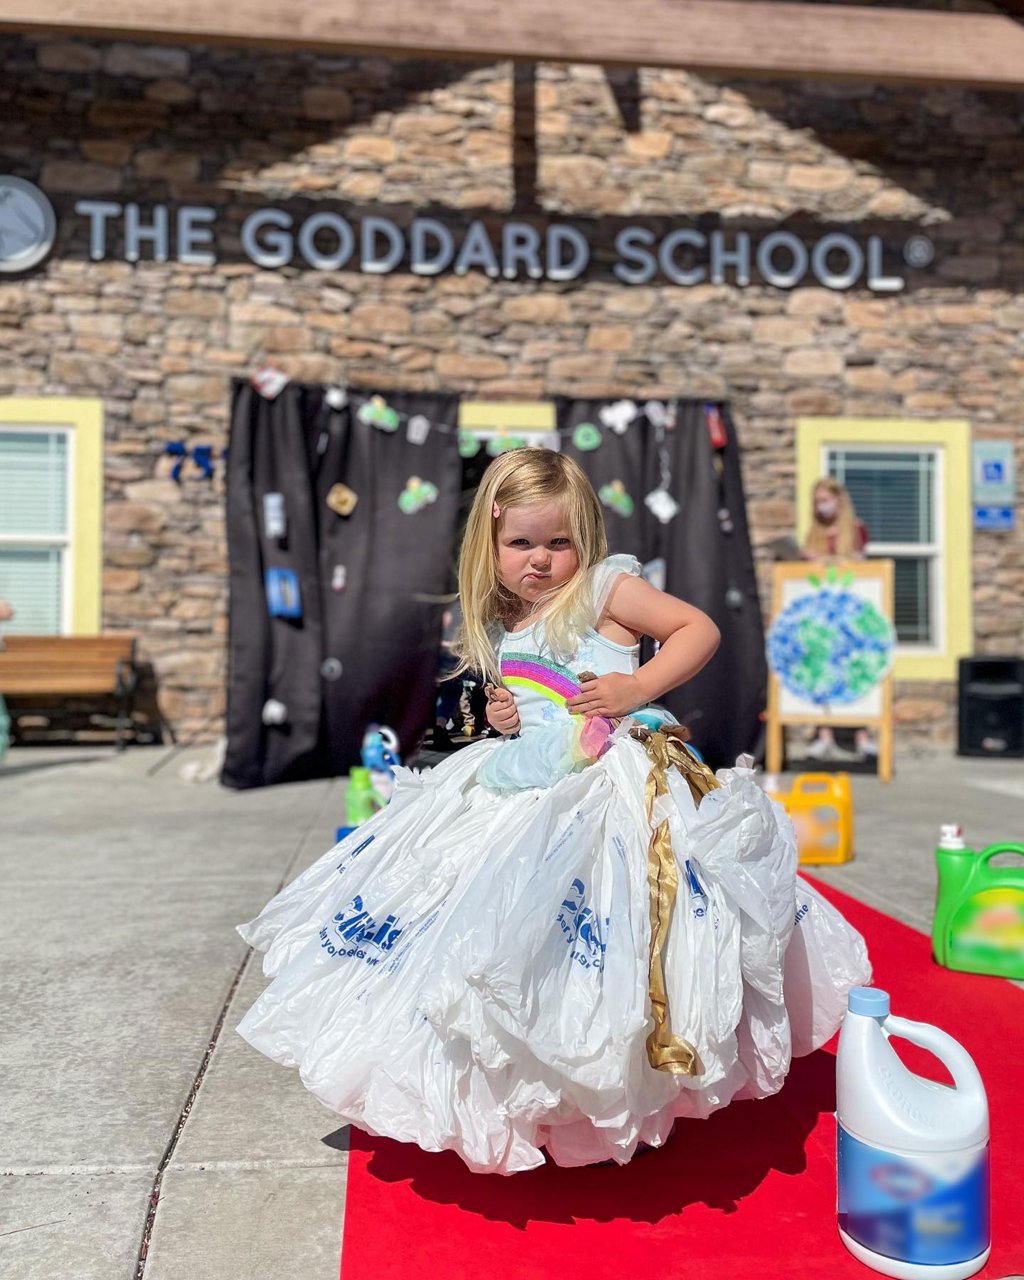 Little girl standing on a red carpet in front of a Goddard School in an upcycled dress